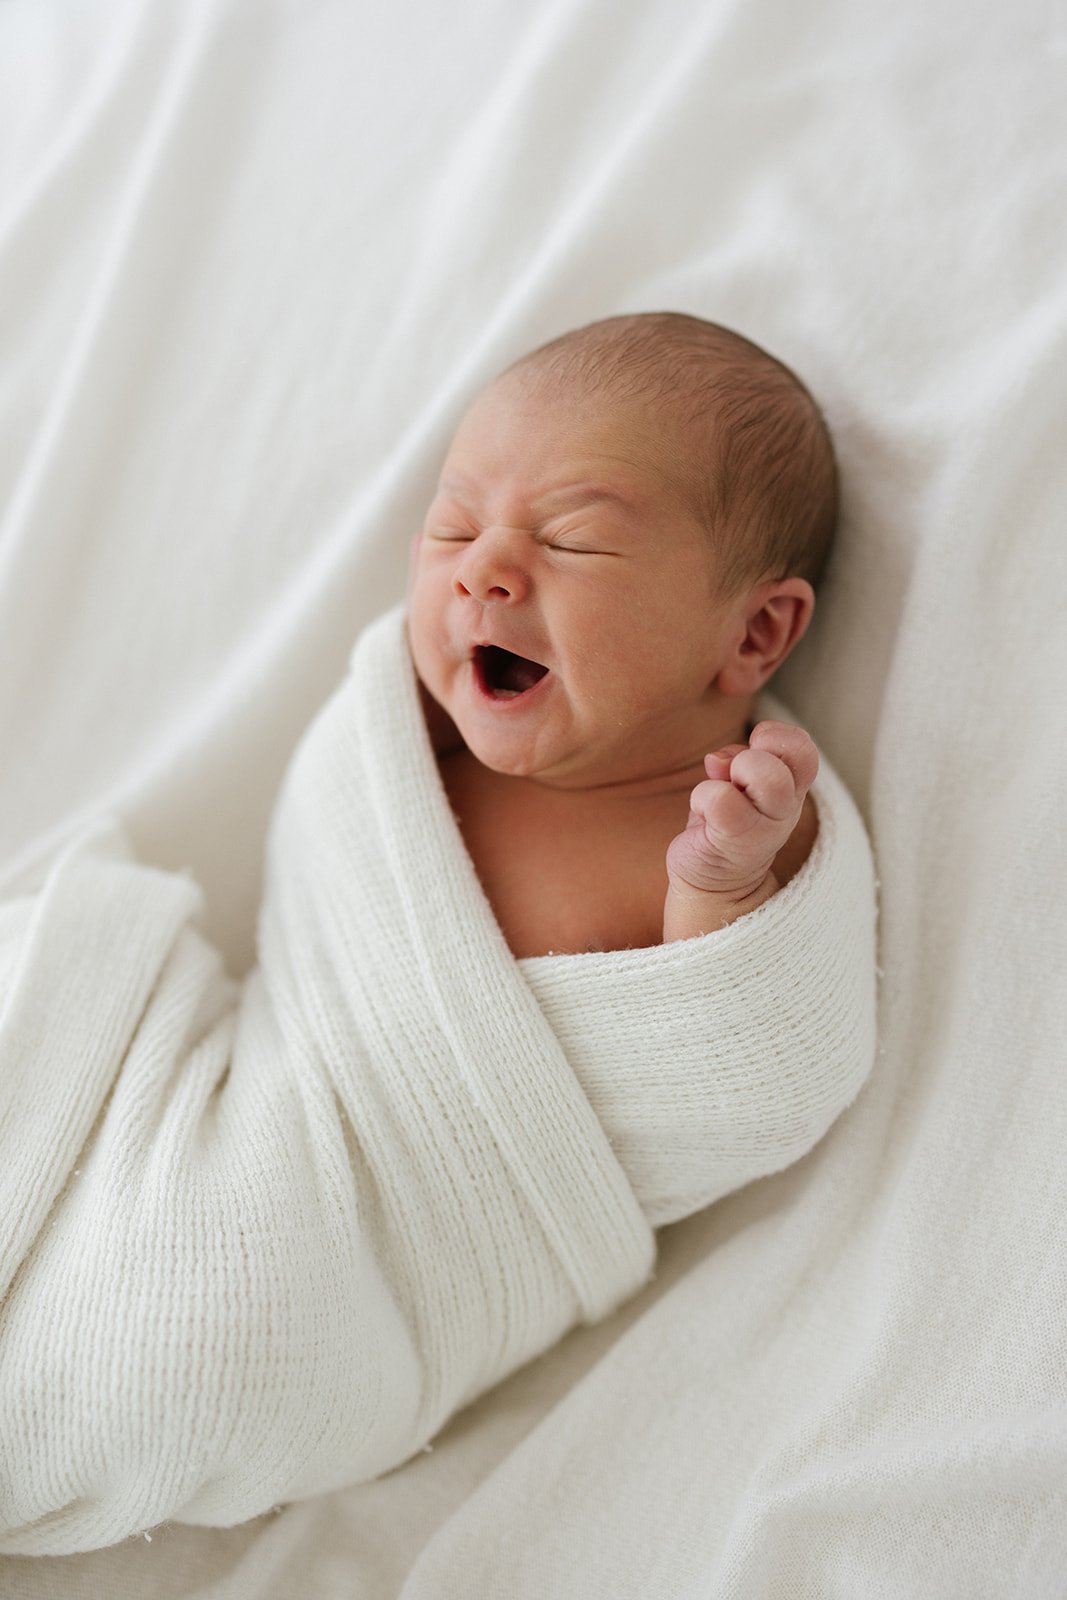 A photographer of a baby having a big yawn as they are laying on a white blanket